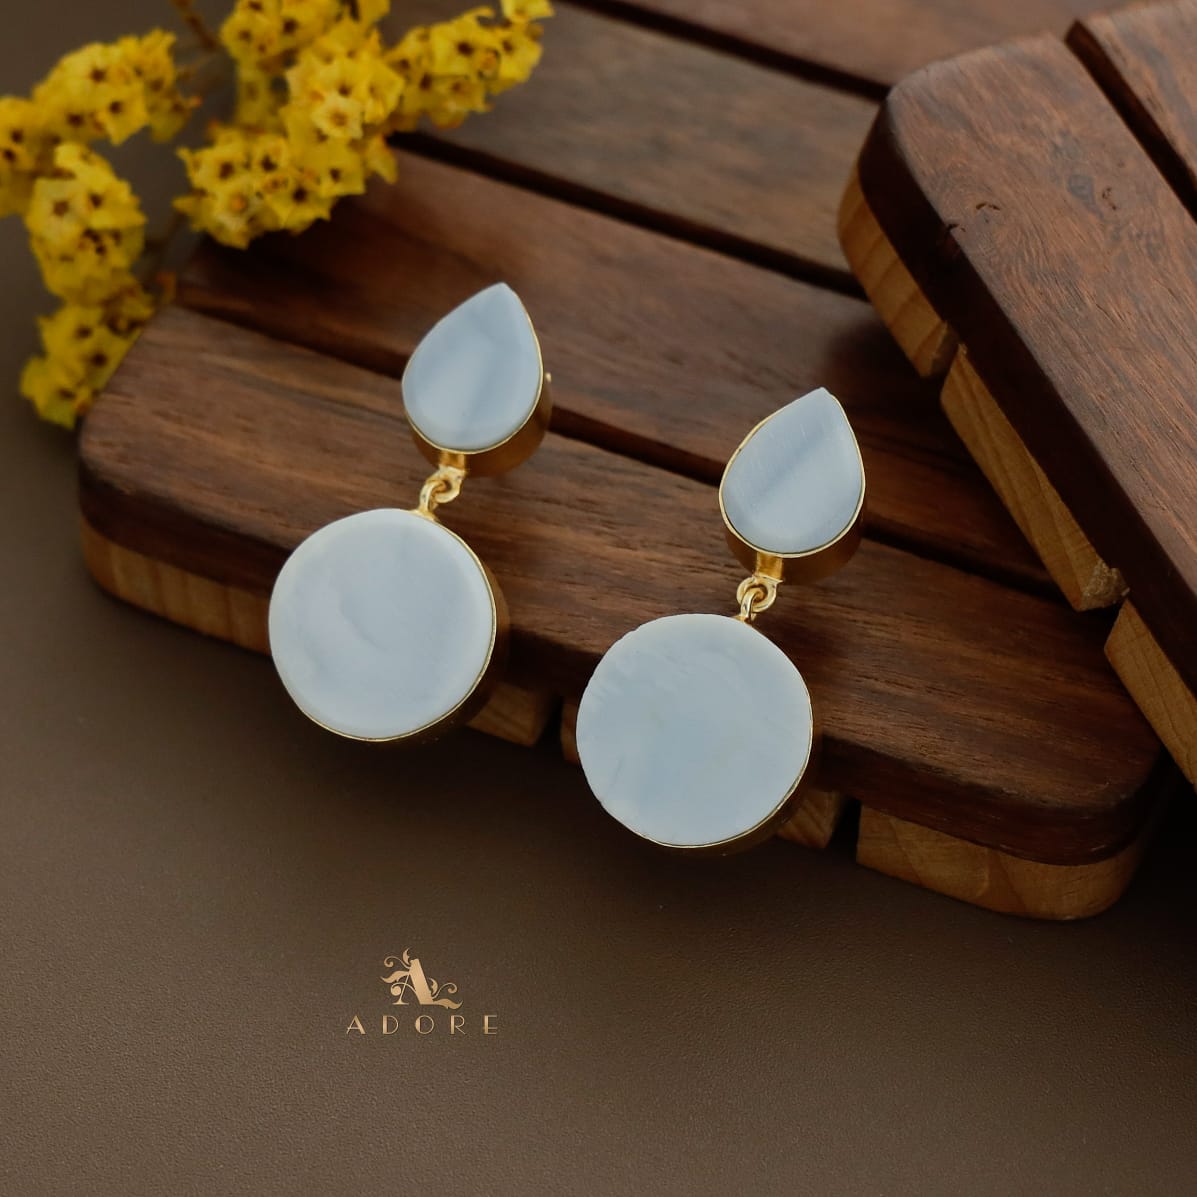 Buy Brown Enamelled With White Stone Stud Earrings Online - W for Woman